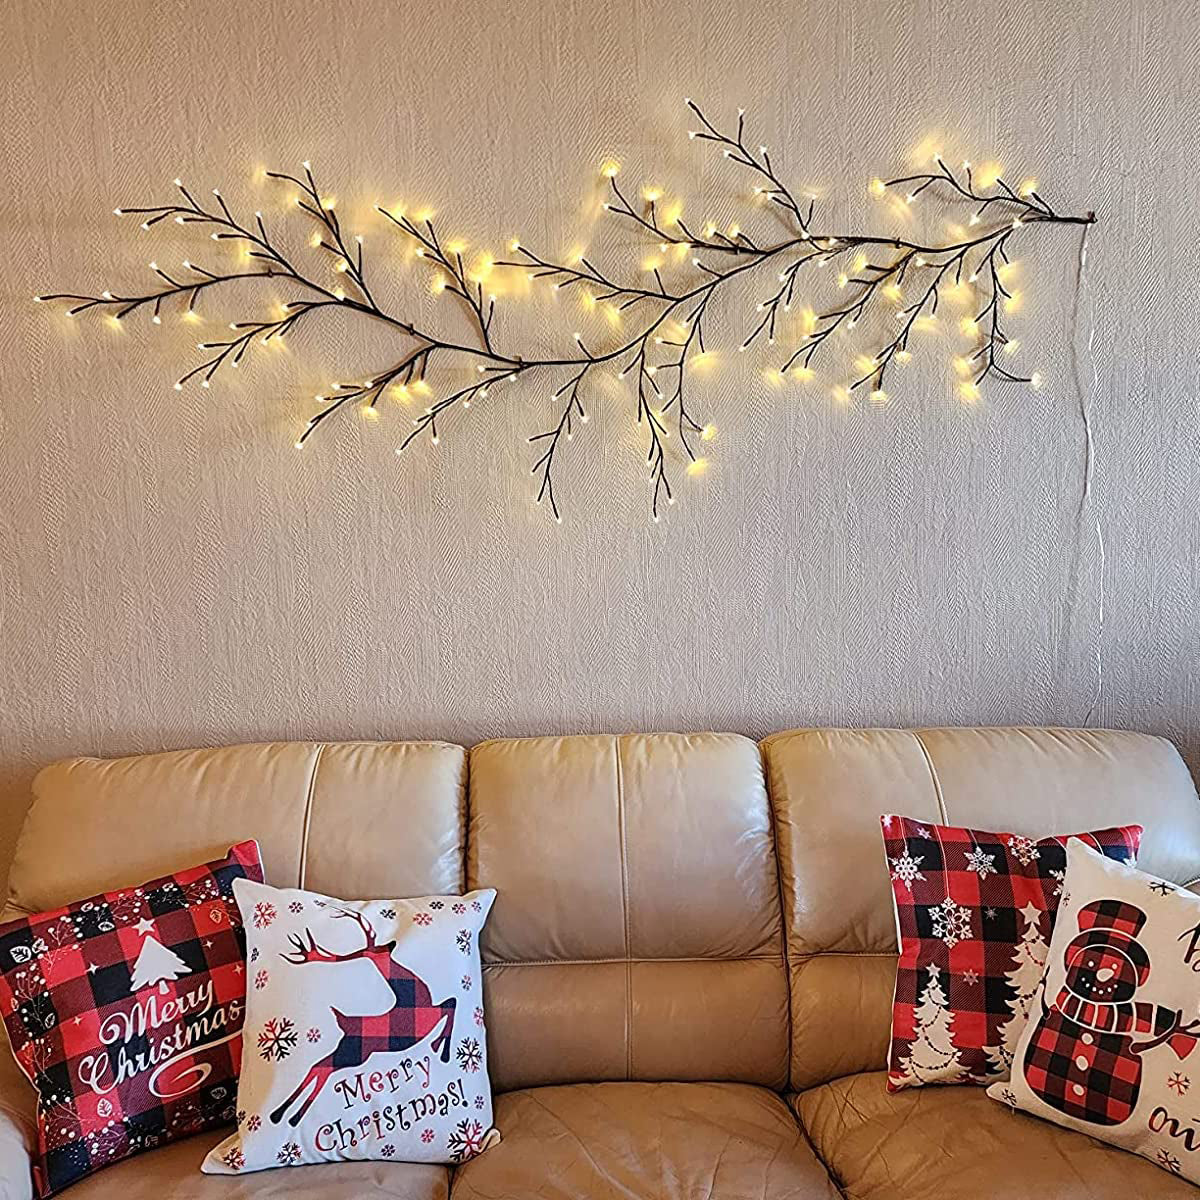 Sparkly Willow Vine - Wall Decor Lamp